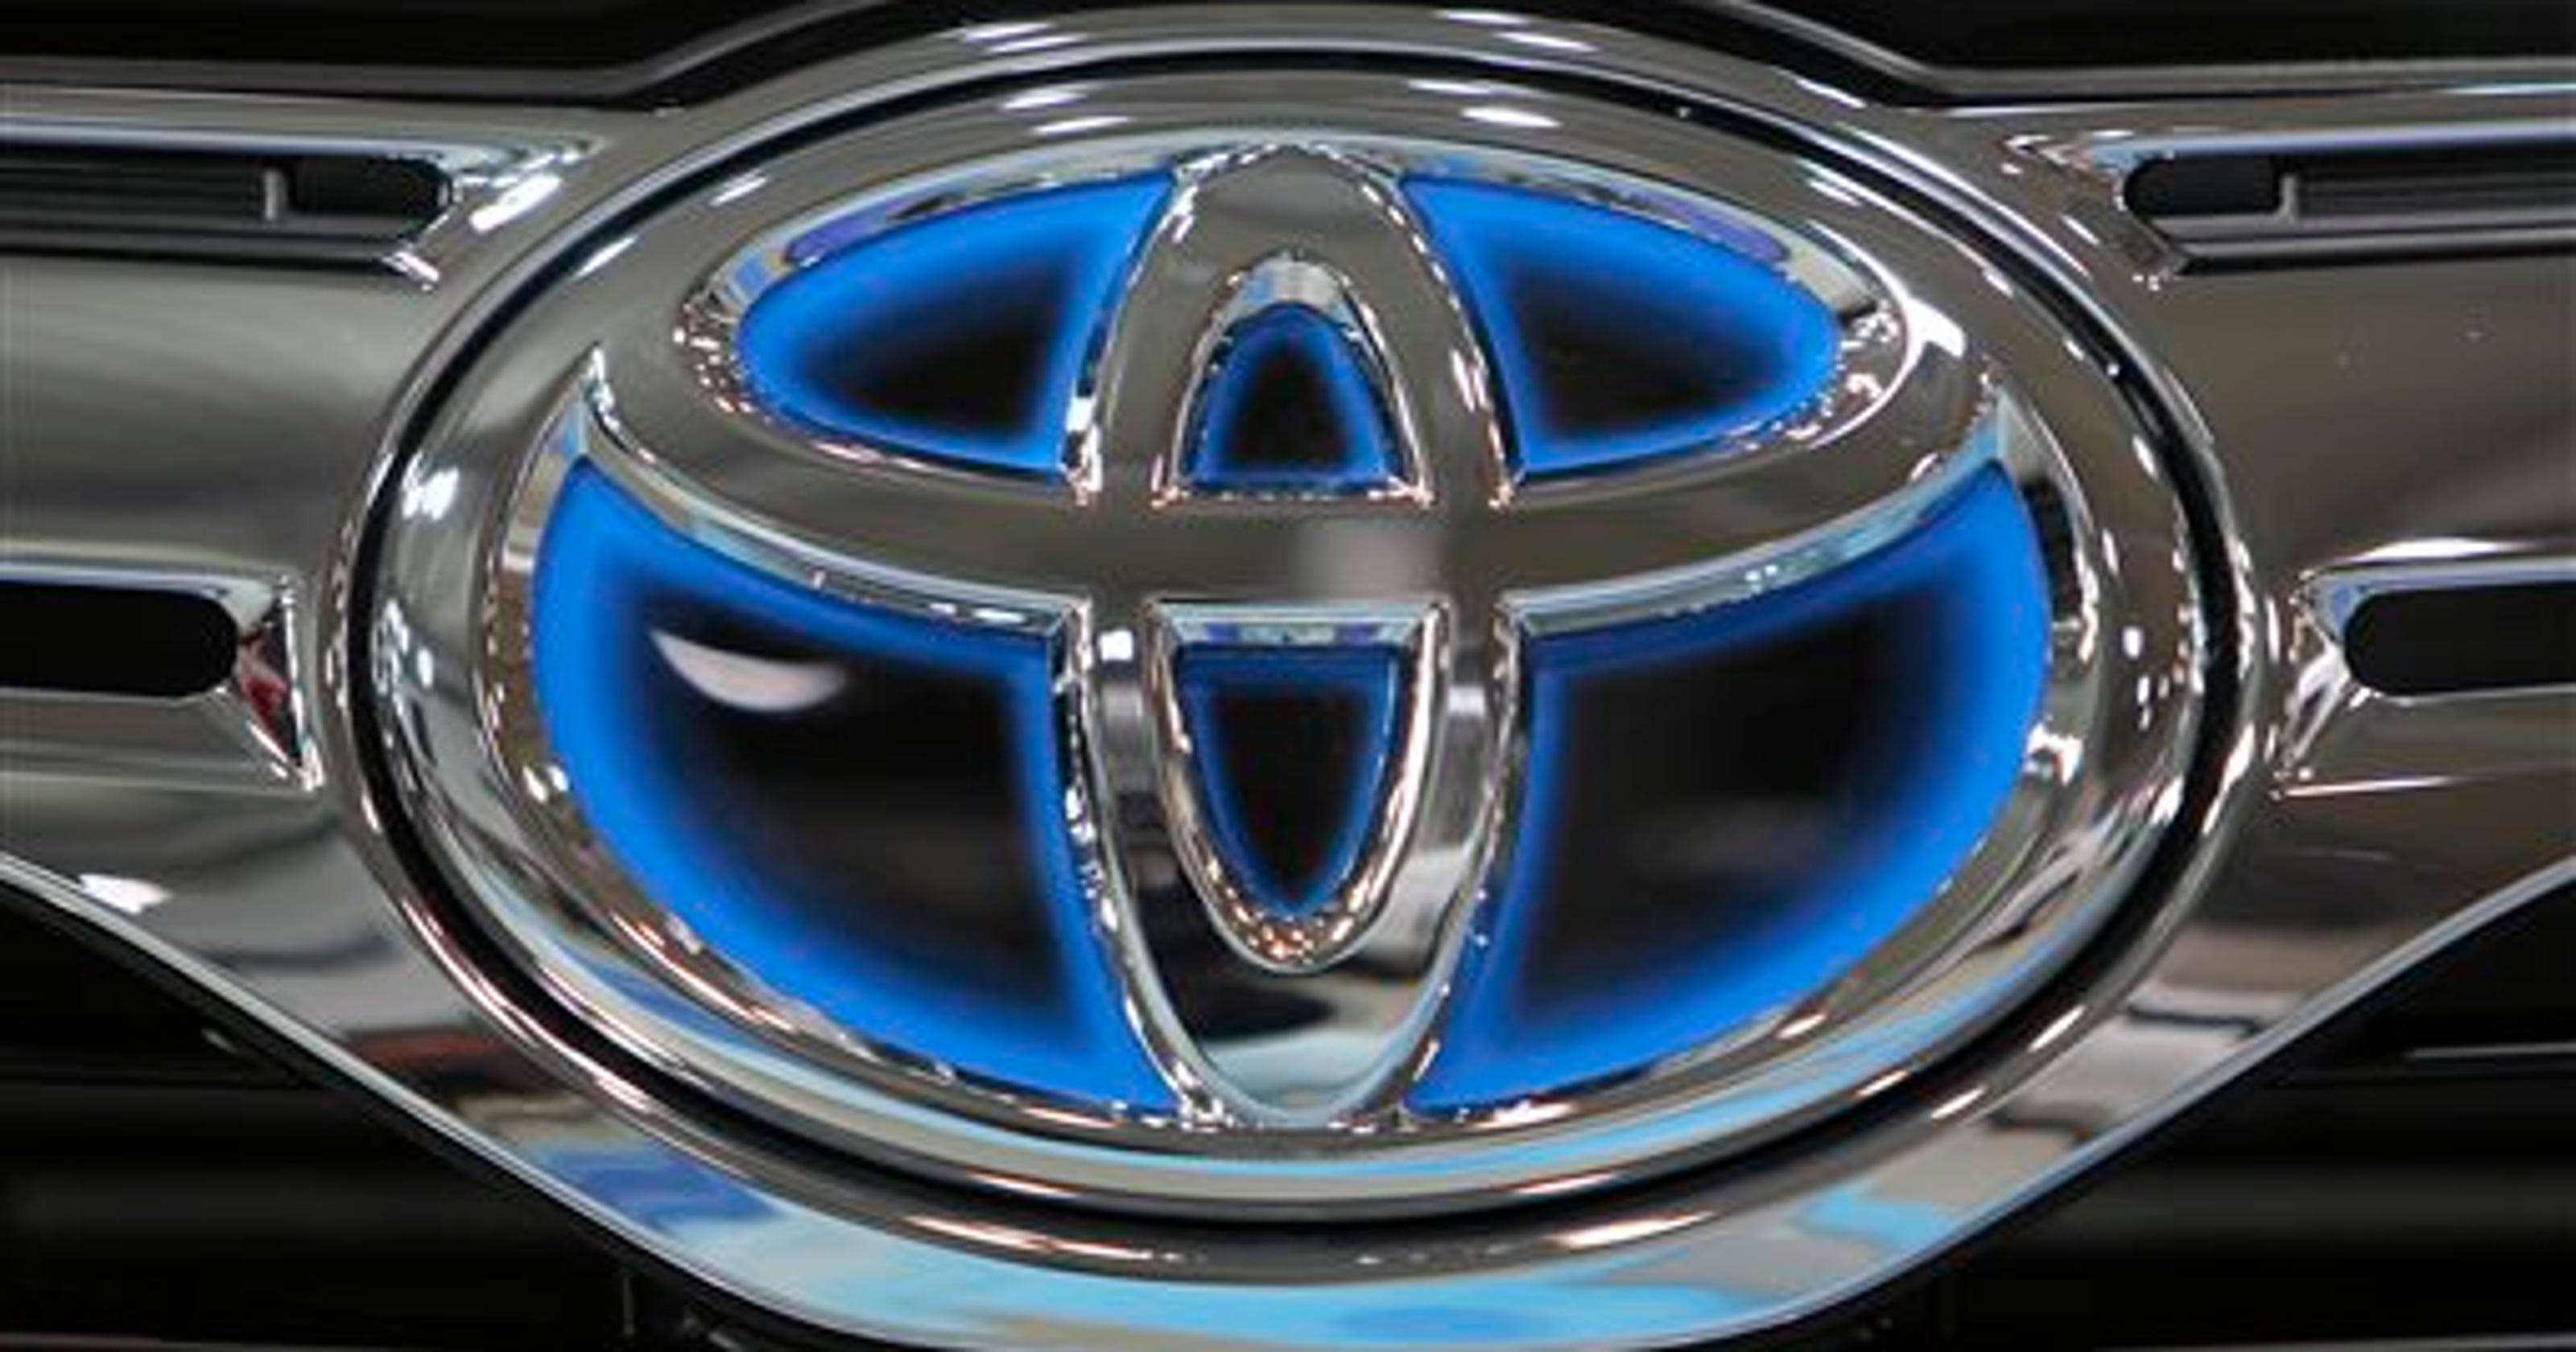 Toyota airbag recall: Product recall includes Lexus brands